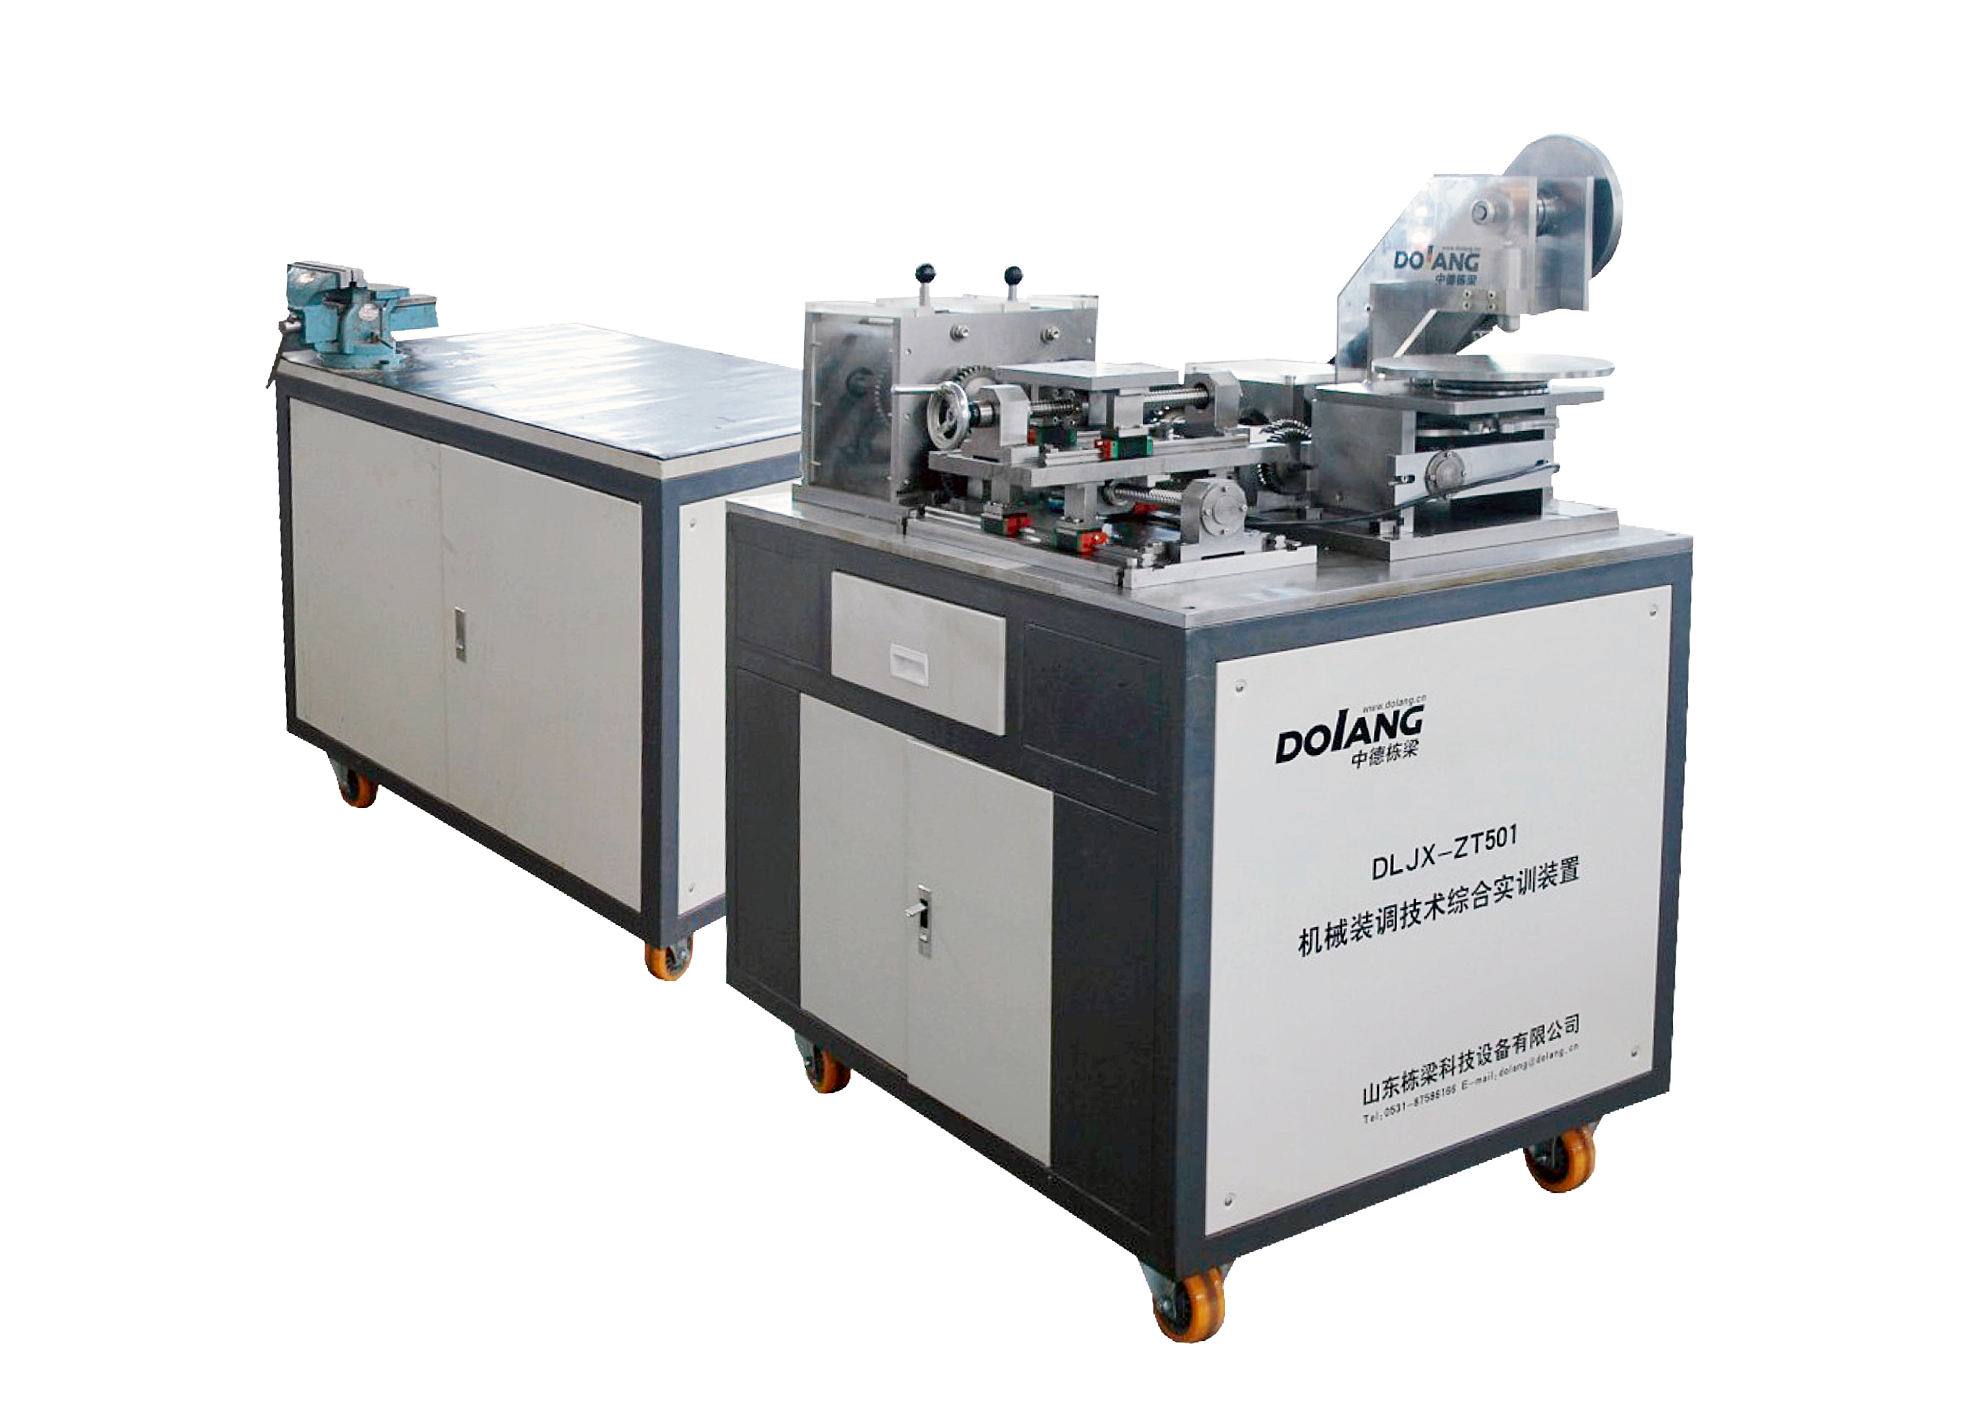 DLJX-ZT501 Mechanical Assembly and Adjustment technology Comprehensive Training System of vocational education equipment